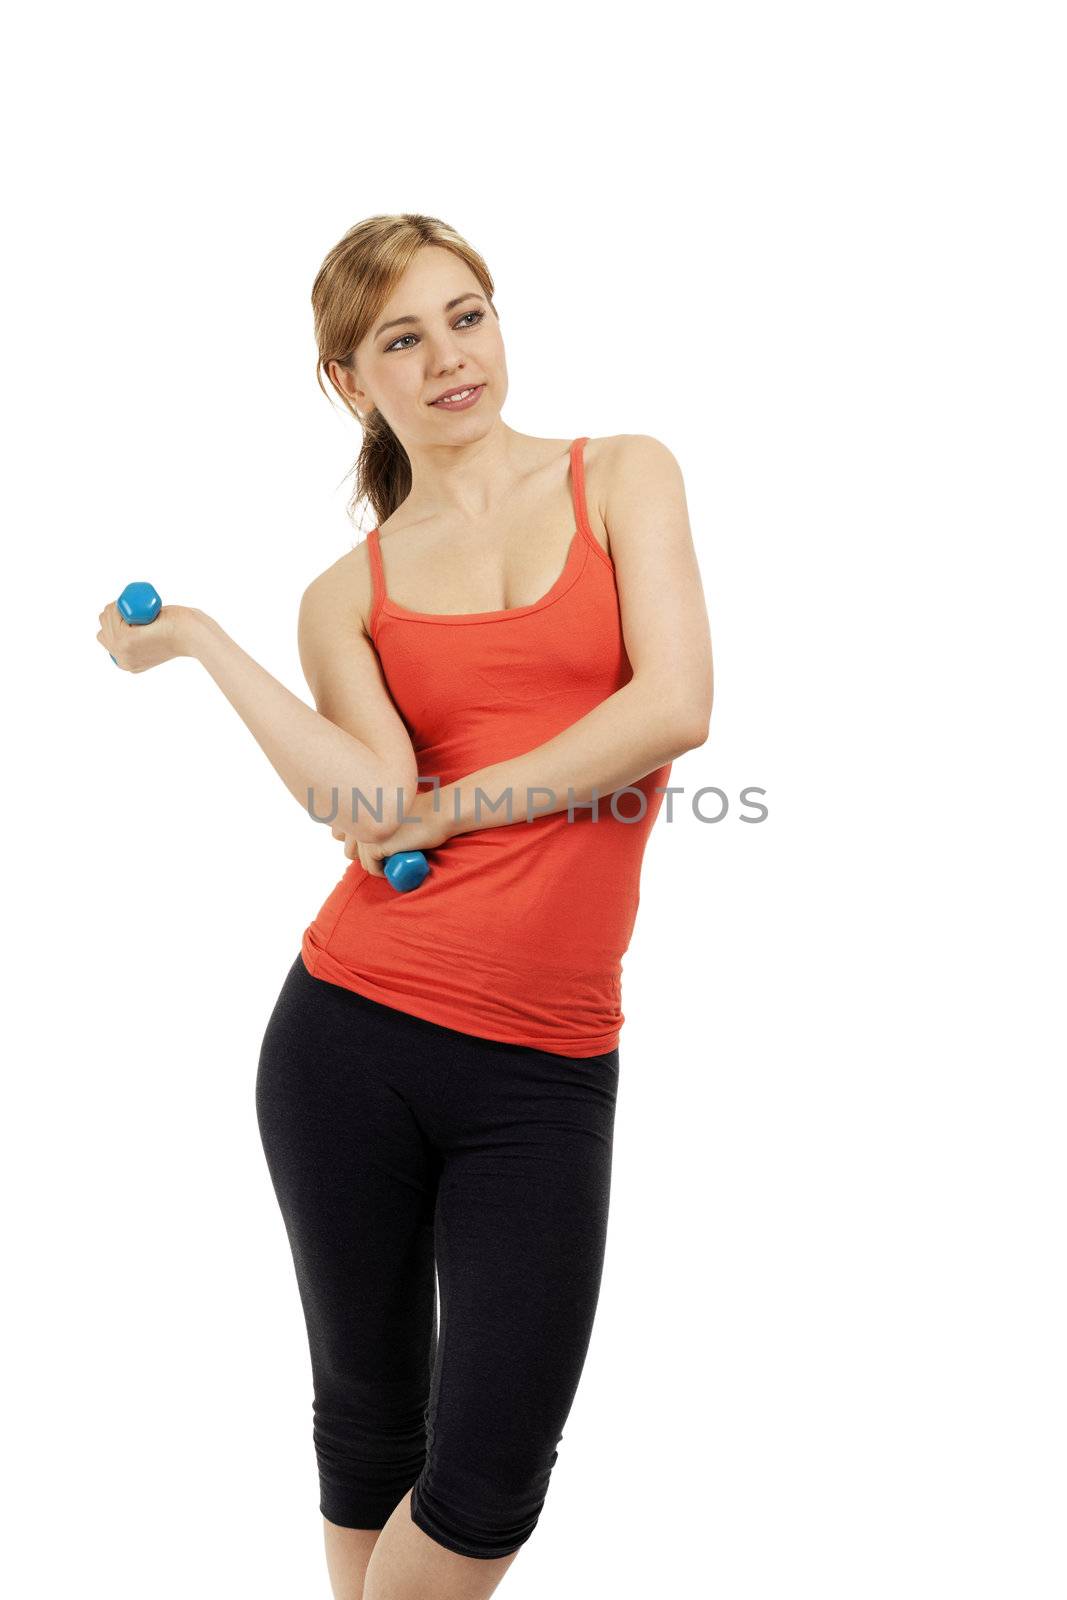 fitness woman with blue dumbbells by RobStark